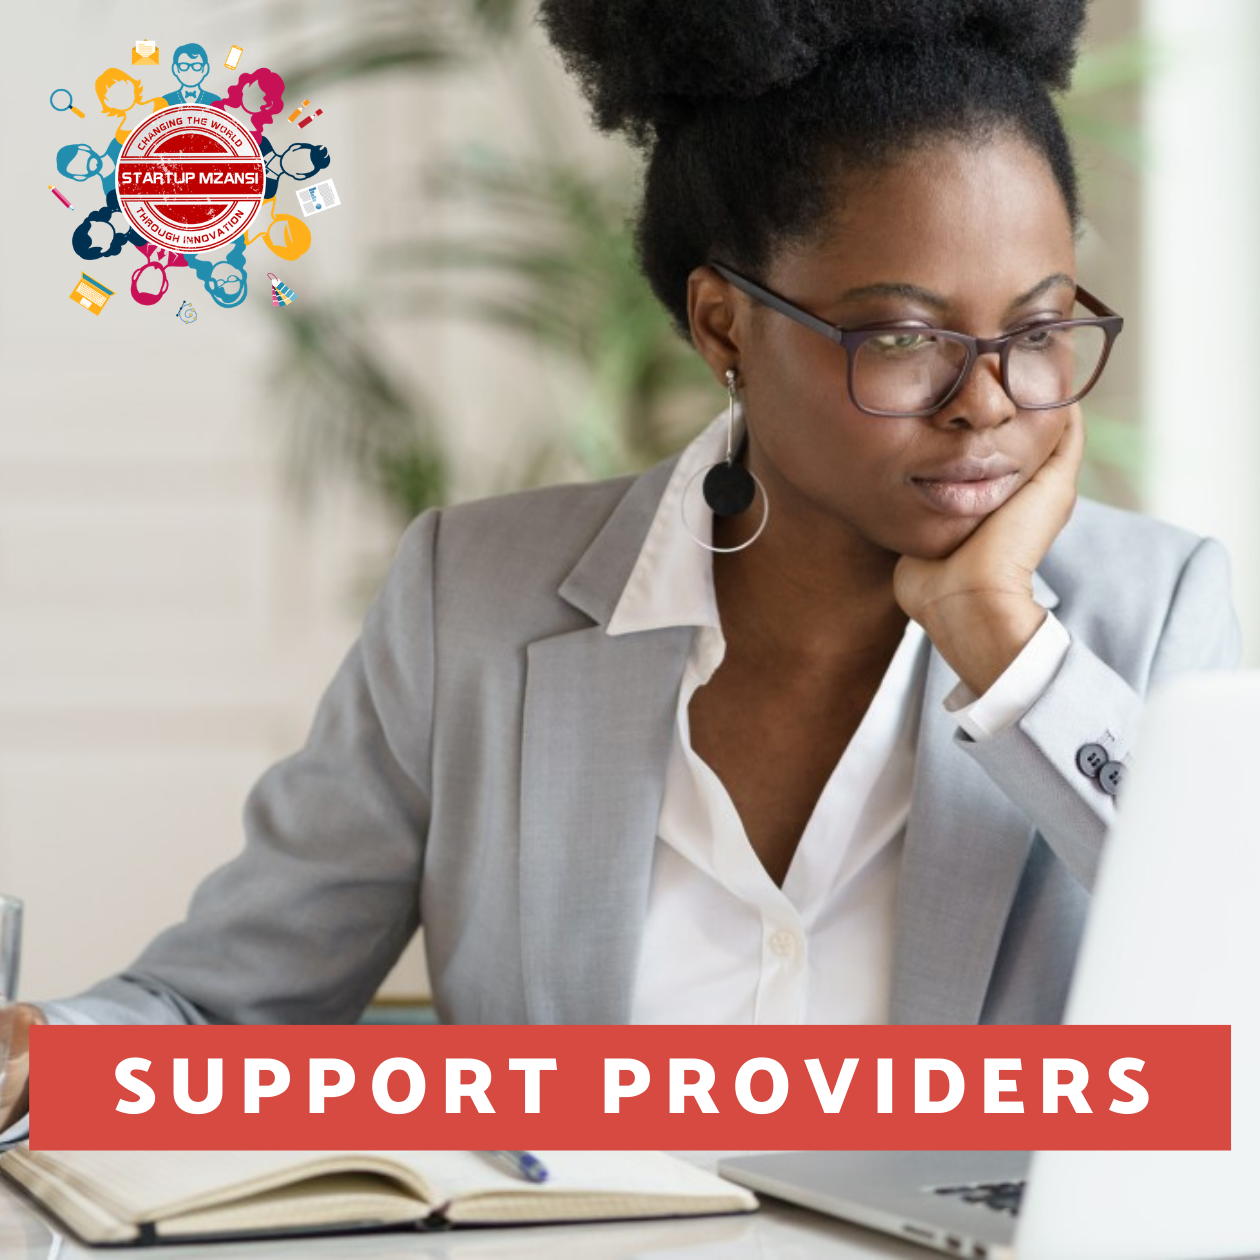 FOR SUPPORT PROVIDERS